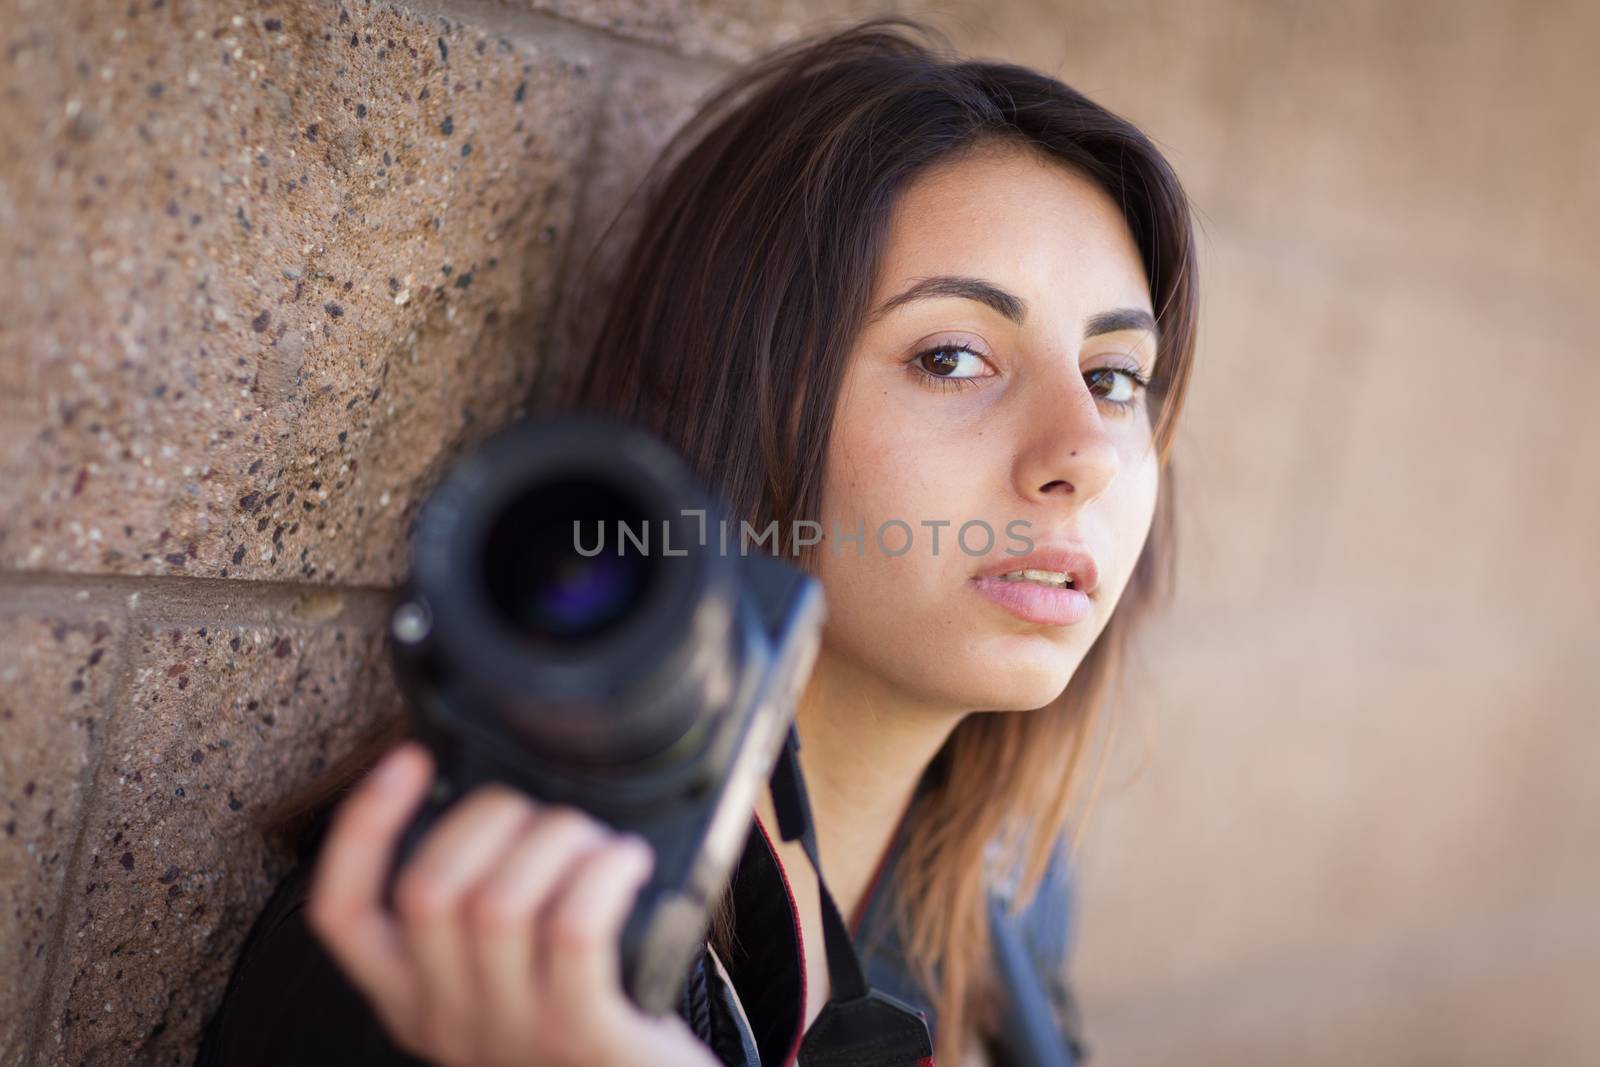 Young Adult Ethnic Female Photographer Against Wall Holding Camera.